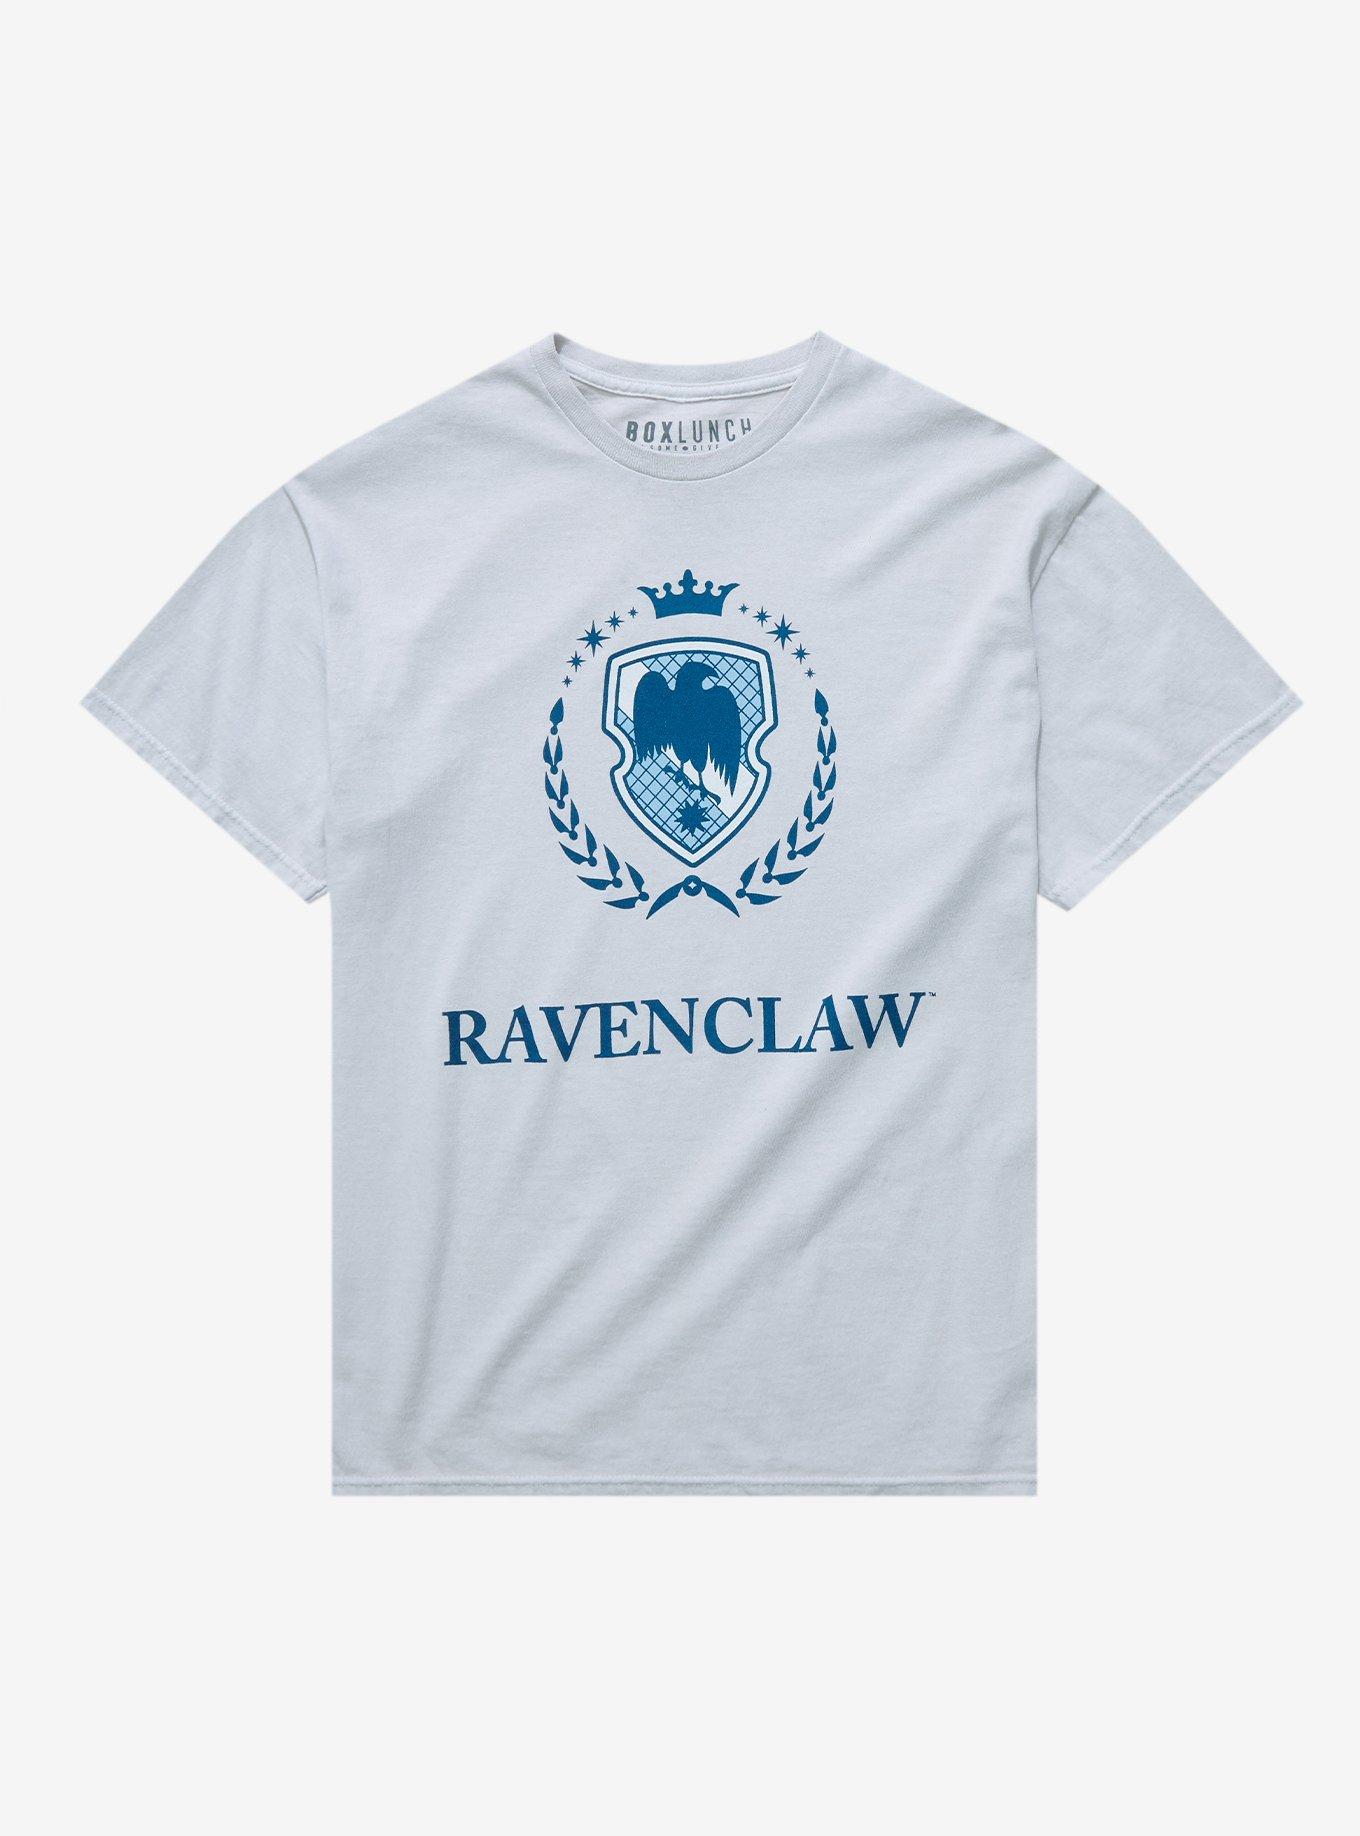 BoxLunch T-Shirt Crest Harry Ravenclaw Tonal | Potter Exclusive - BoxLunch